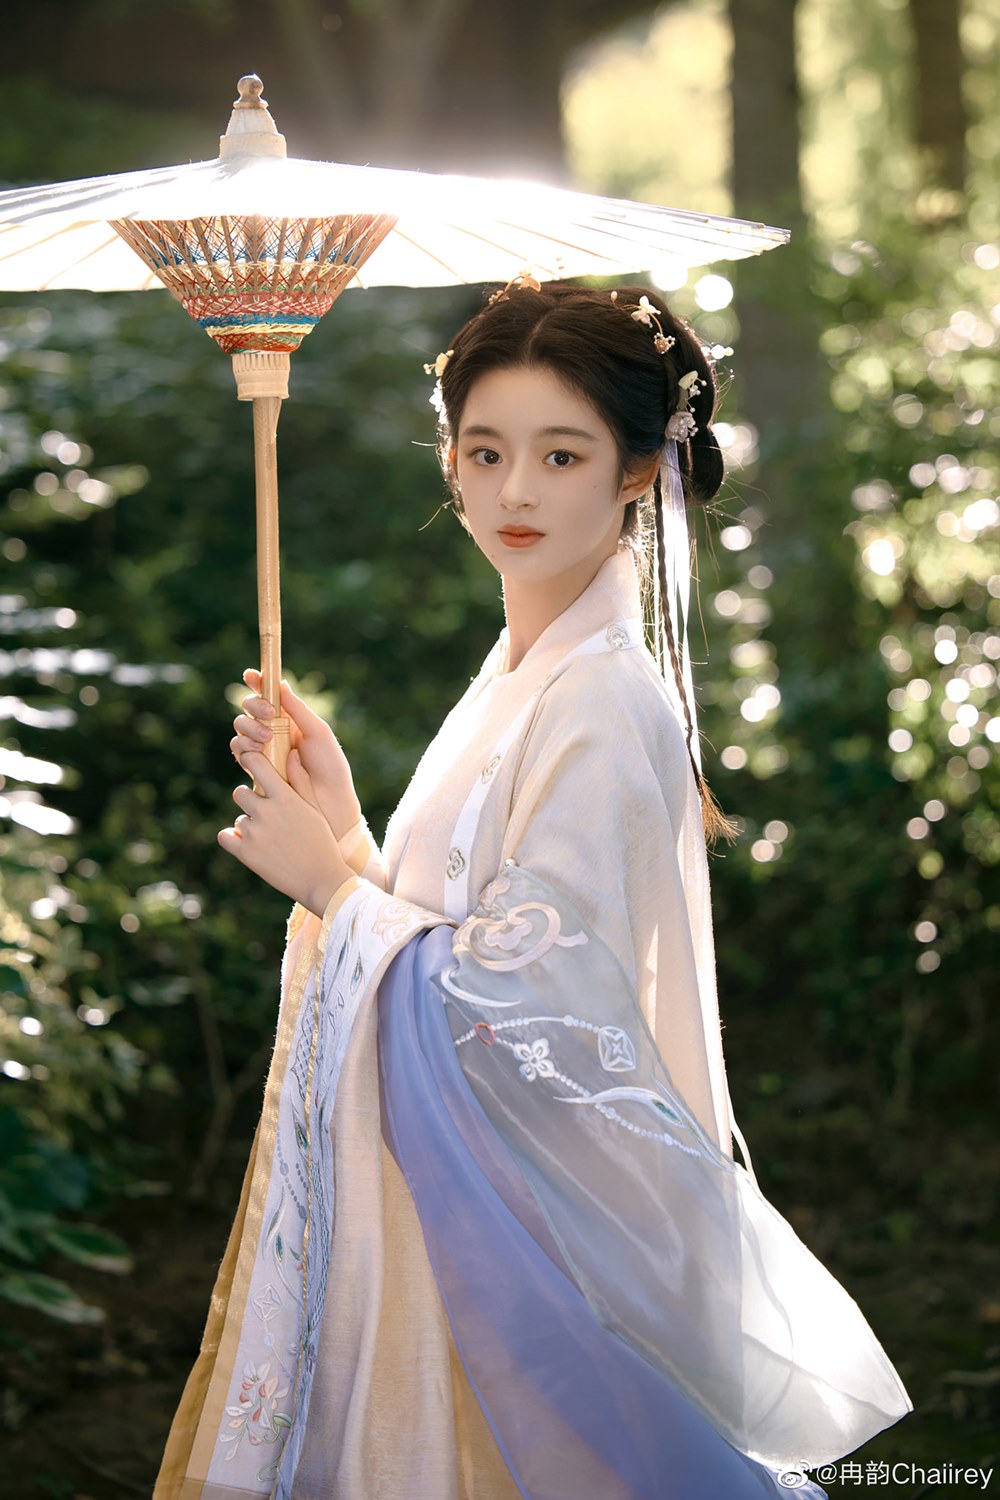 Girls 14, 15 years old have been praised as " billion-billion-dollar fairy"  compare with Liu Yifei - 3